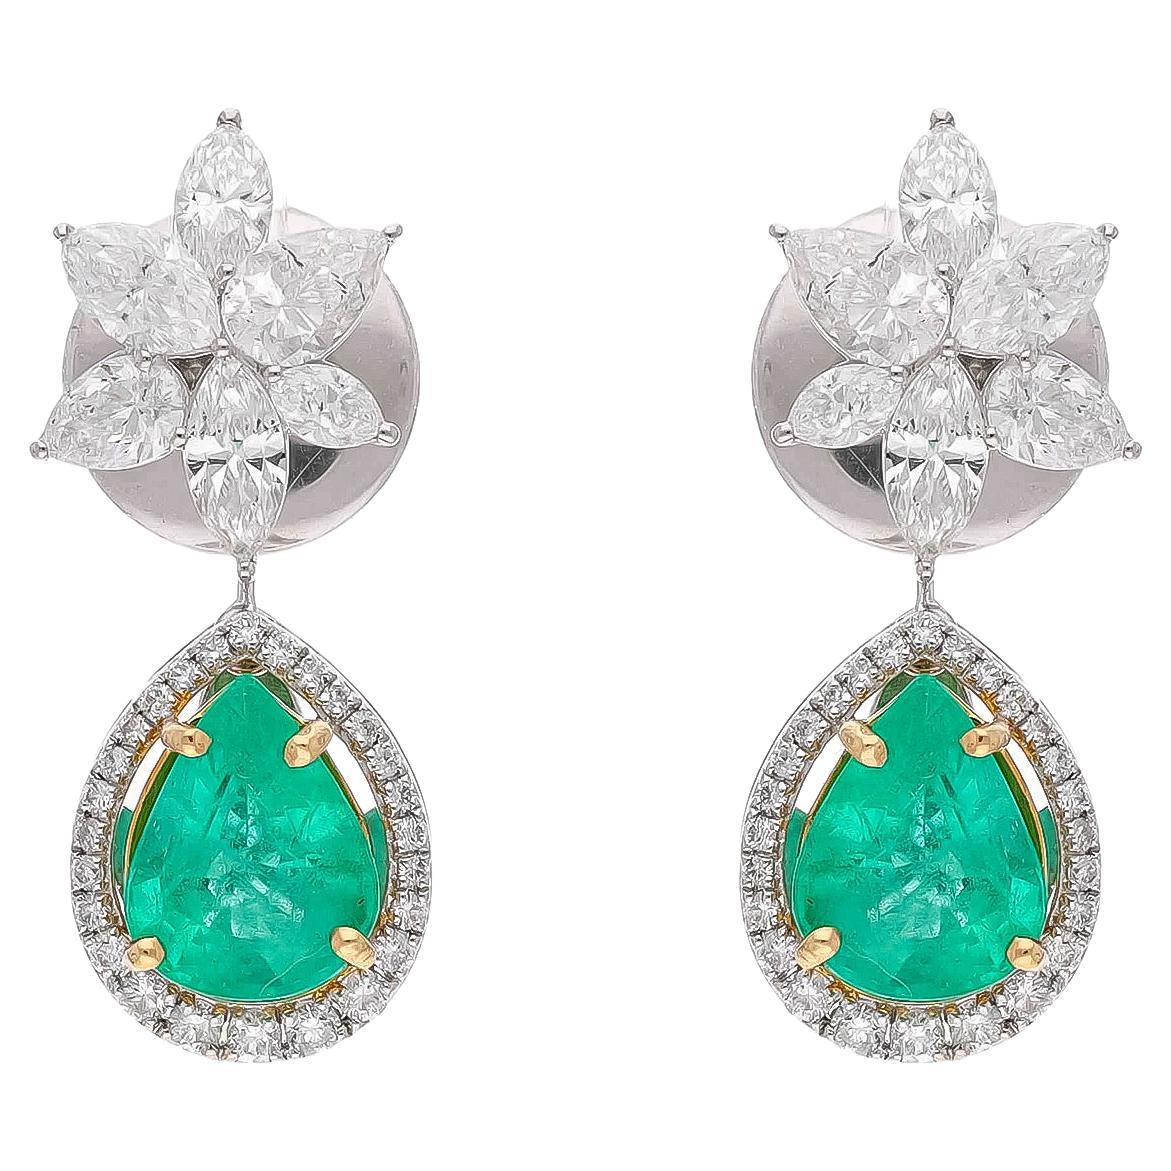 Natural Emerald Earrings with Diamonds in 18k Gold